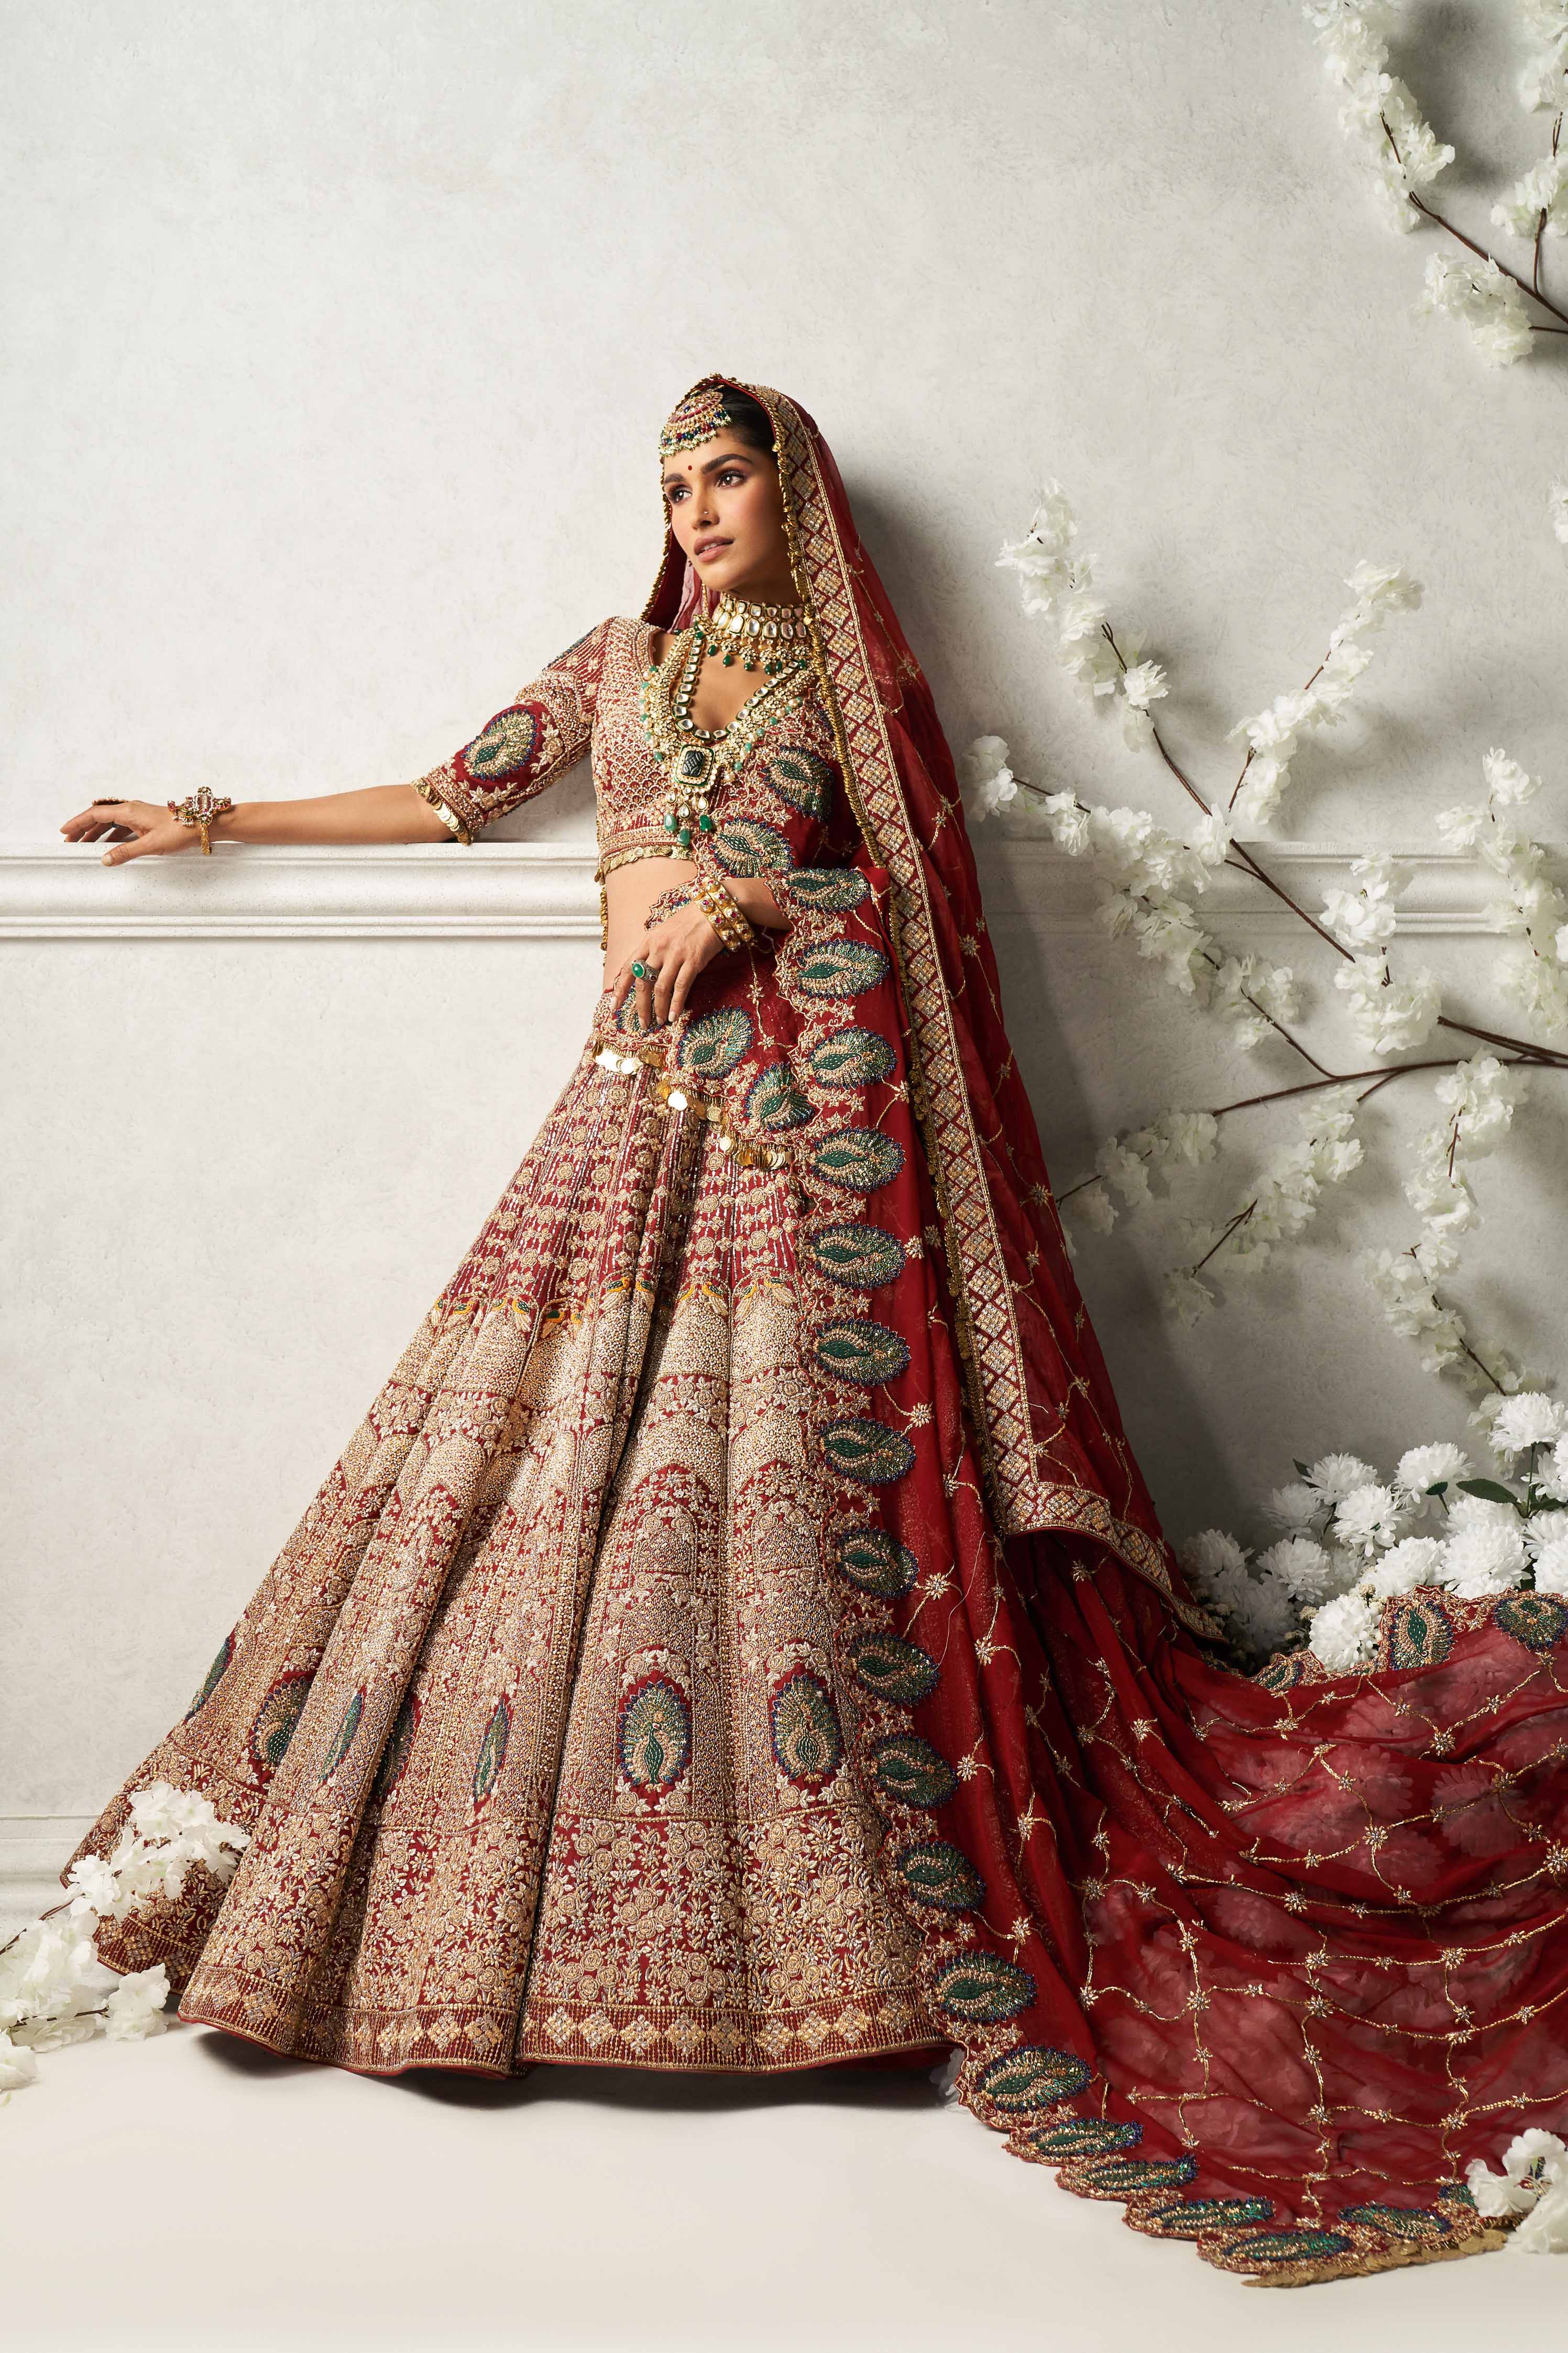 Deep Maroon Bridal Lehenga With Hand Emroidered Peacock Motifs And Two Dupattas